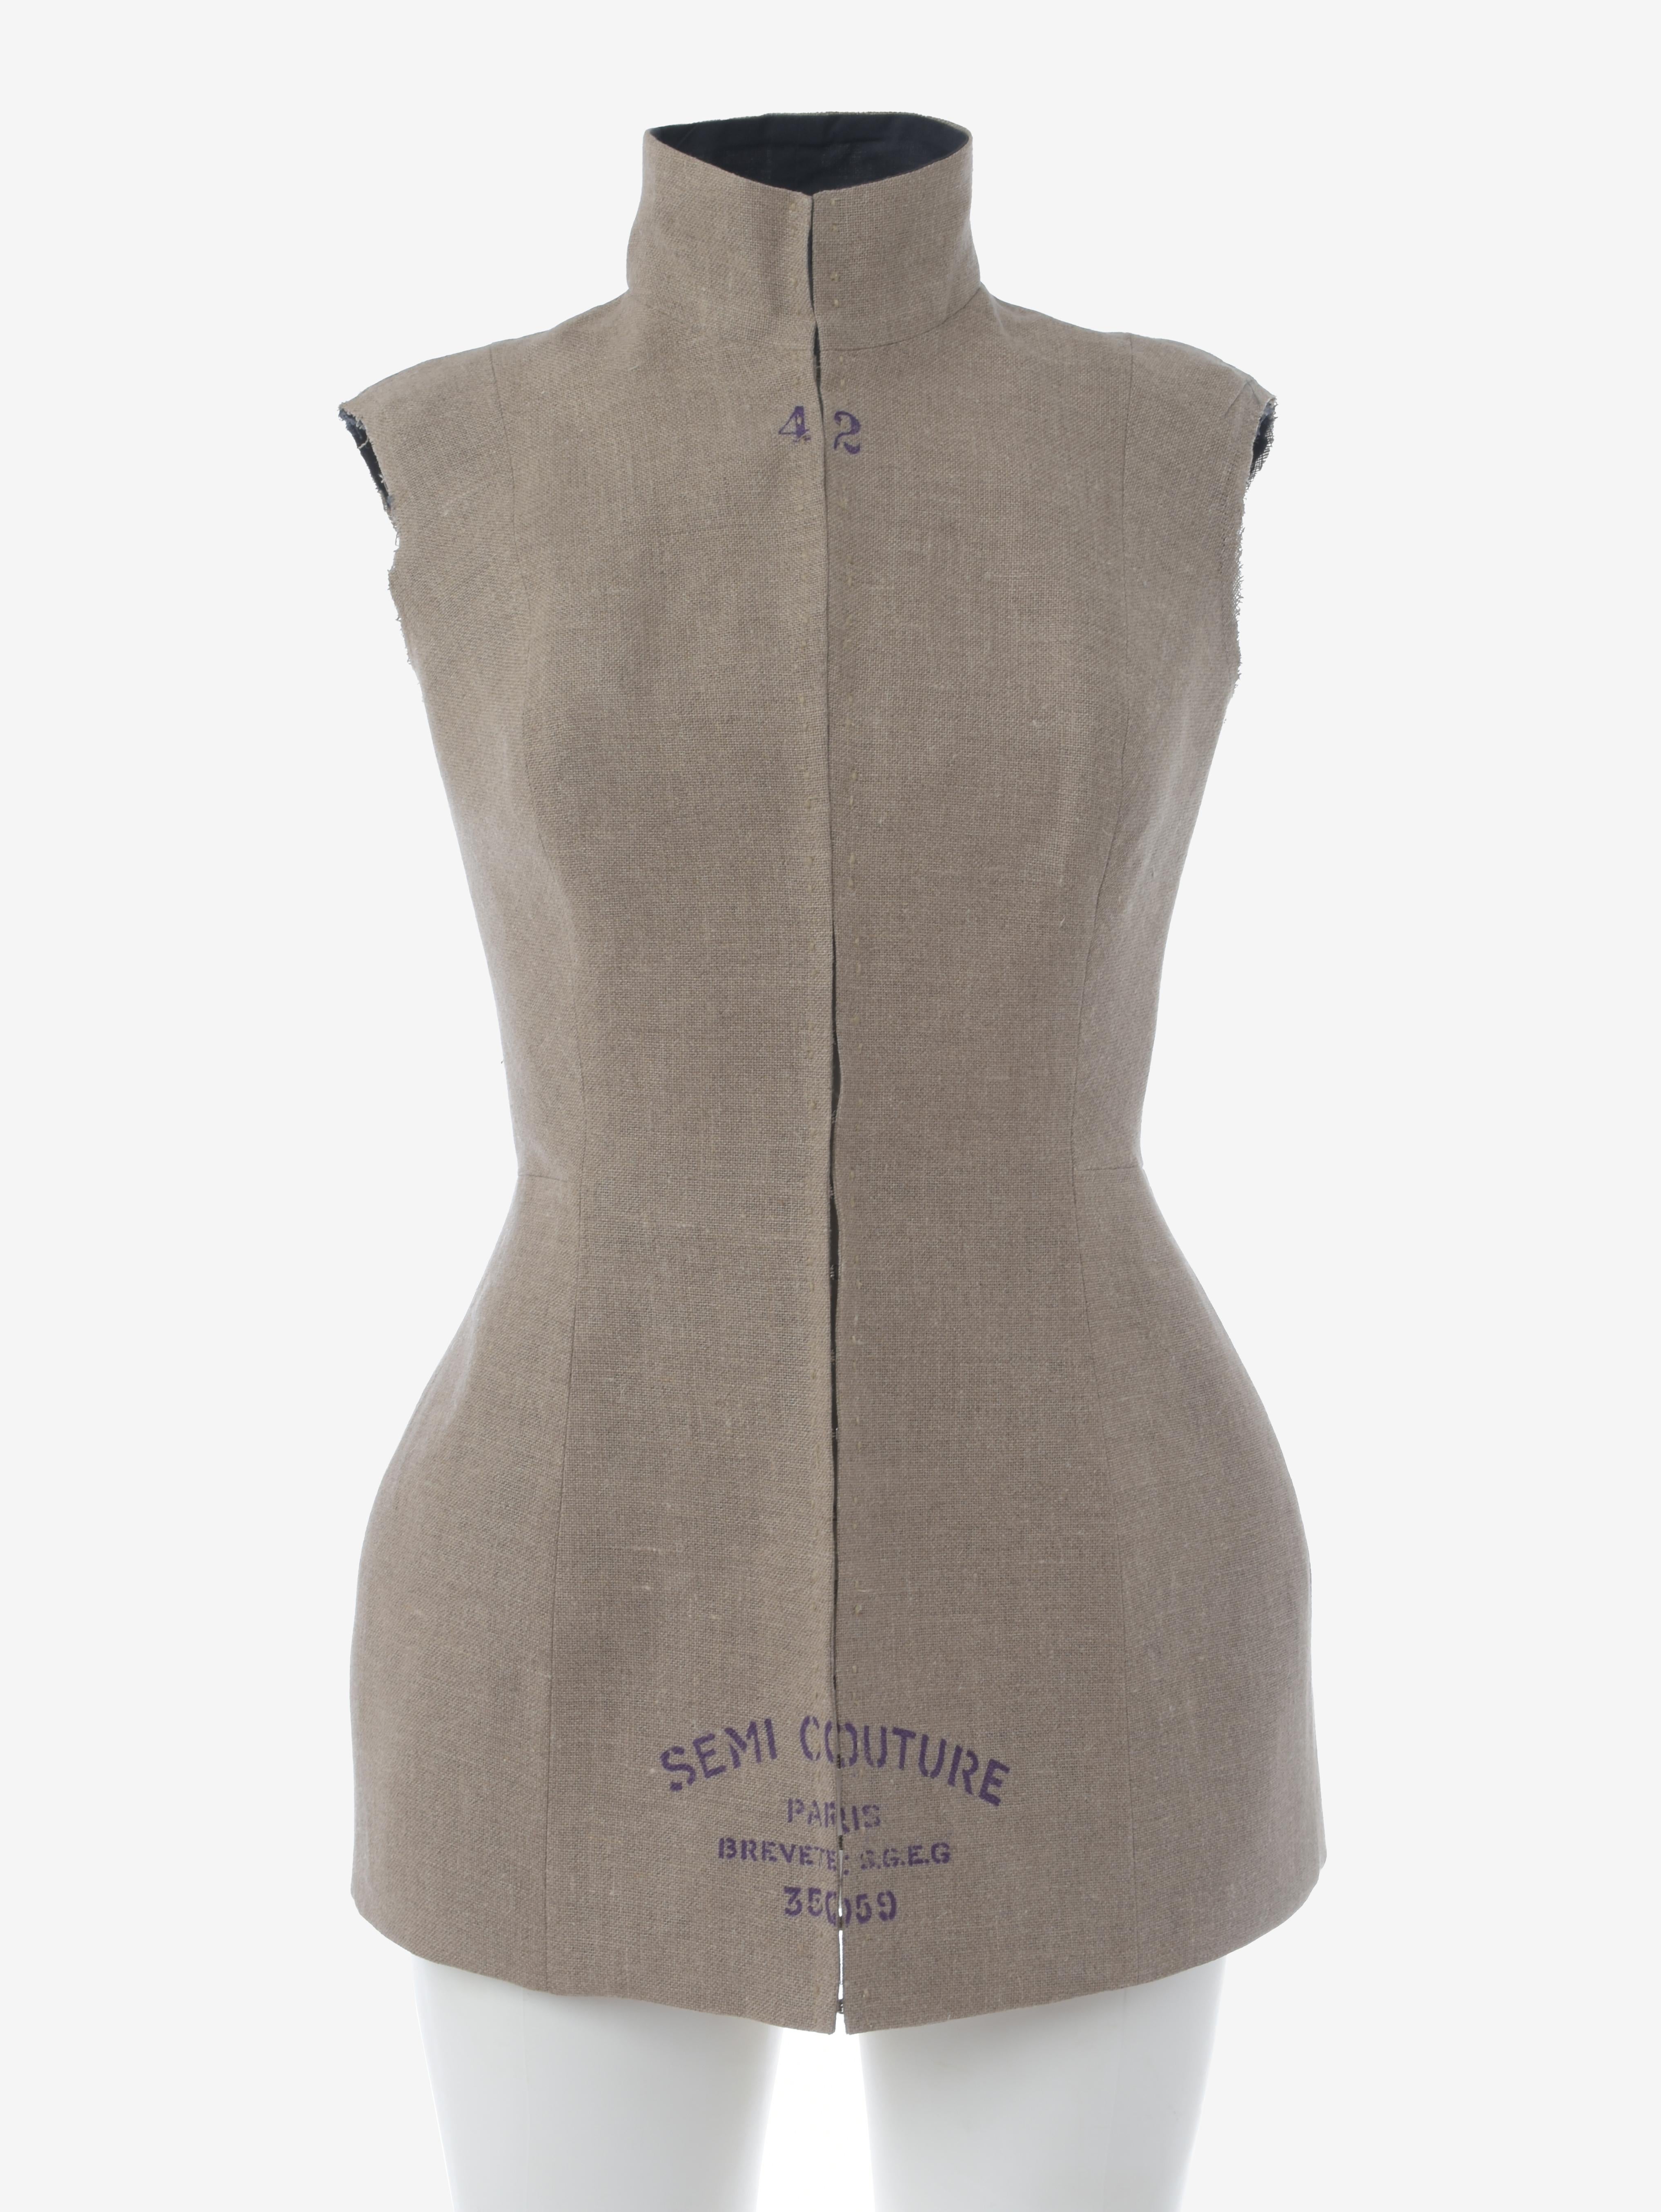 Maison Margiela Semi Couture Dressmaker Bodice is a rare and important original Maison Martin Margiela high-collar Semi Couture dressmaker bodice from 1997. The Semi Couture bodice features a high collar, front closure with frogs  and  printed